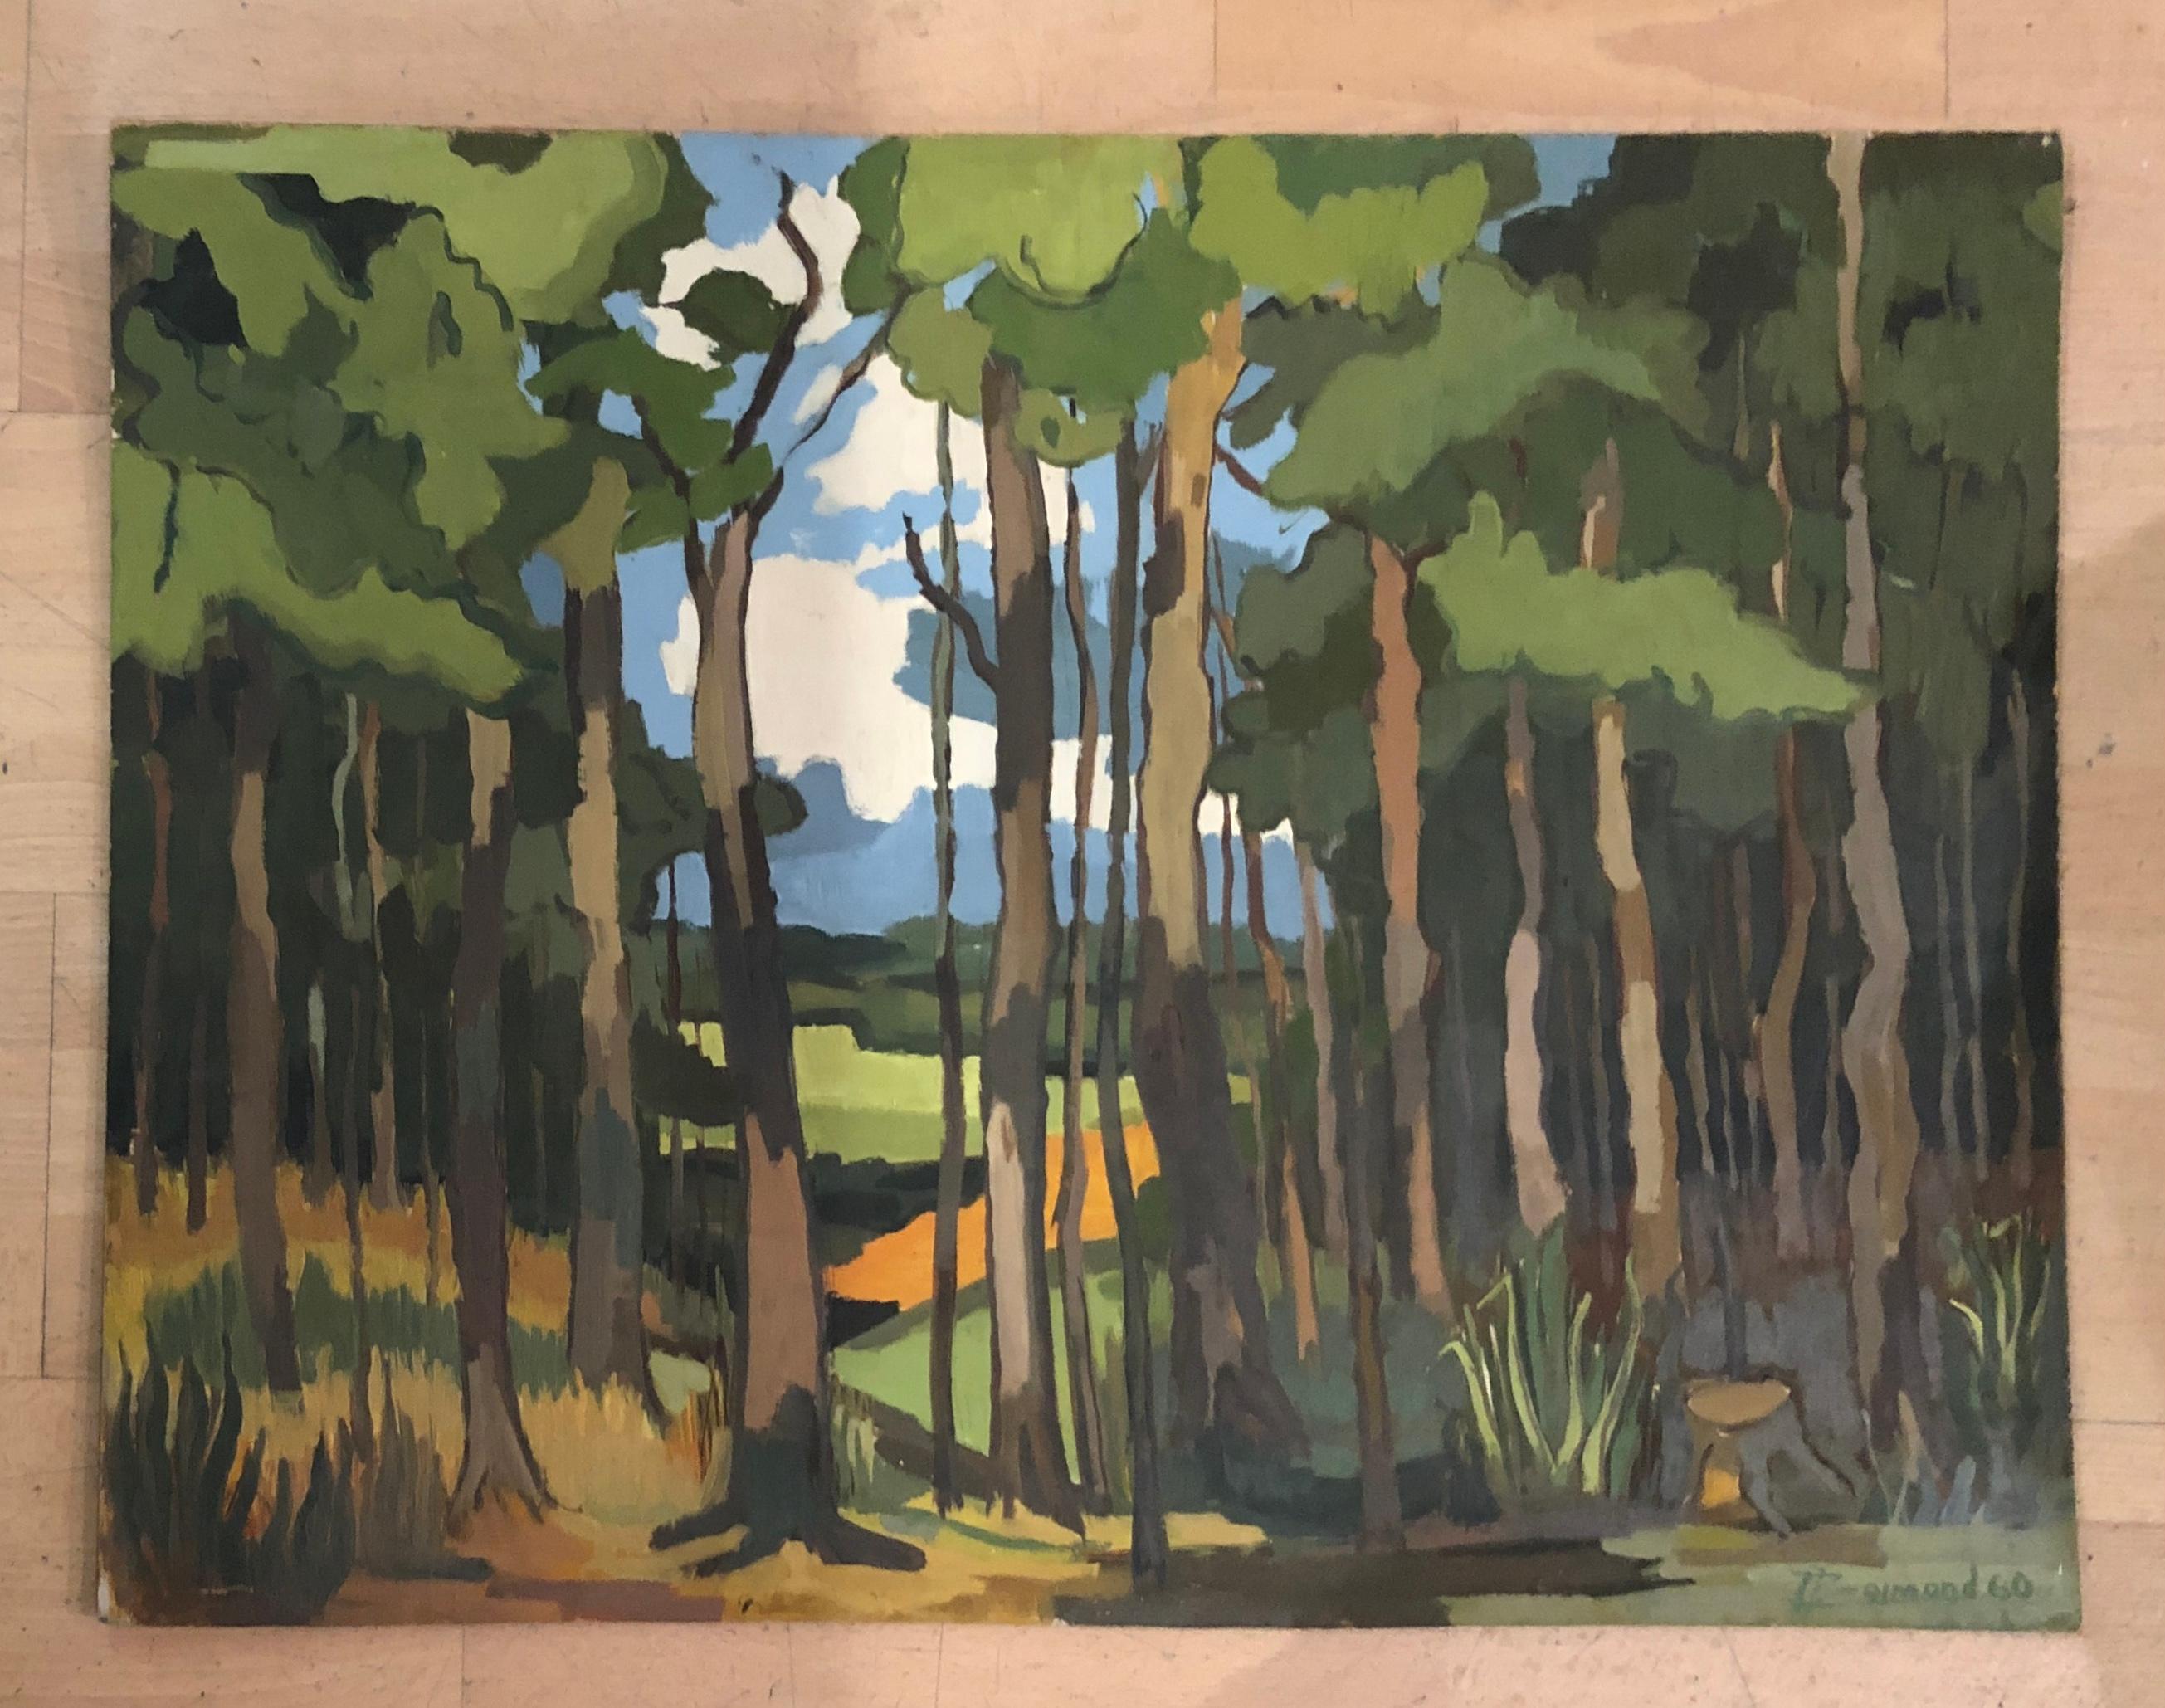 Through the woods - Painting by Jean Jacques Boimond